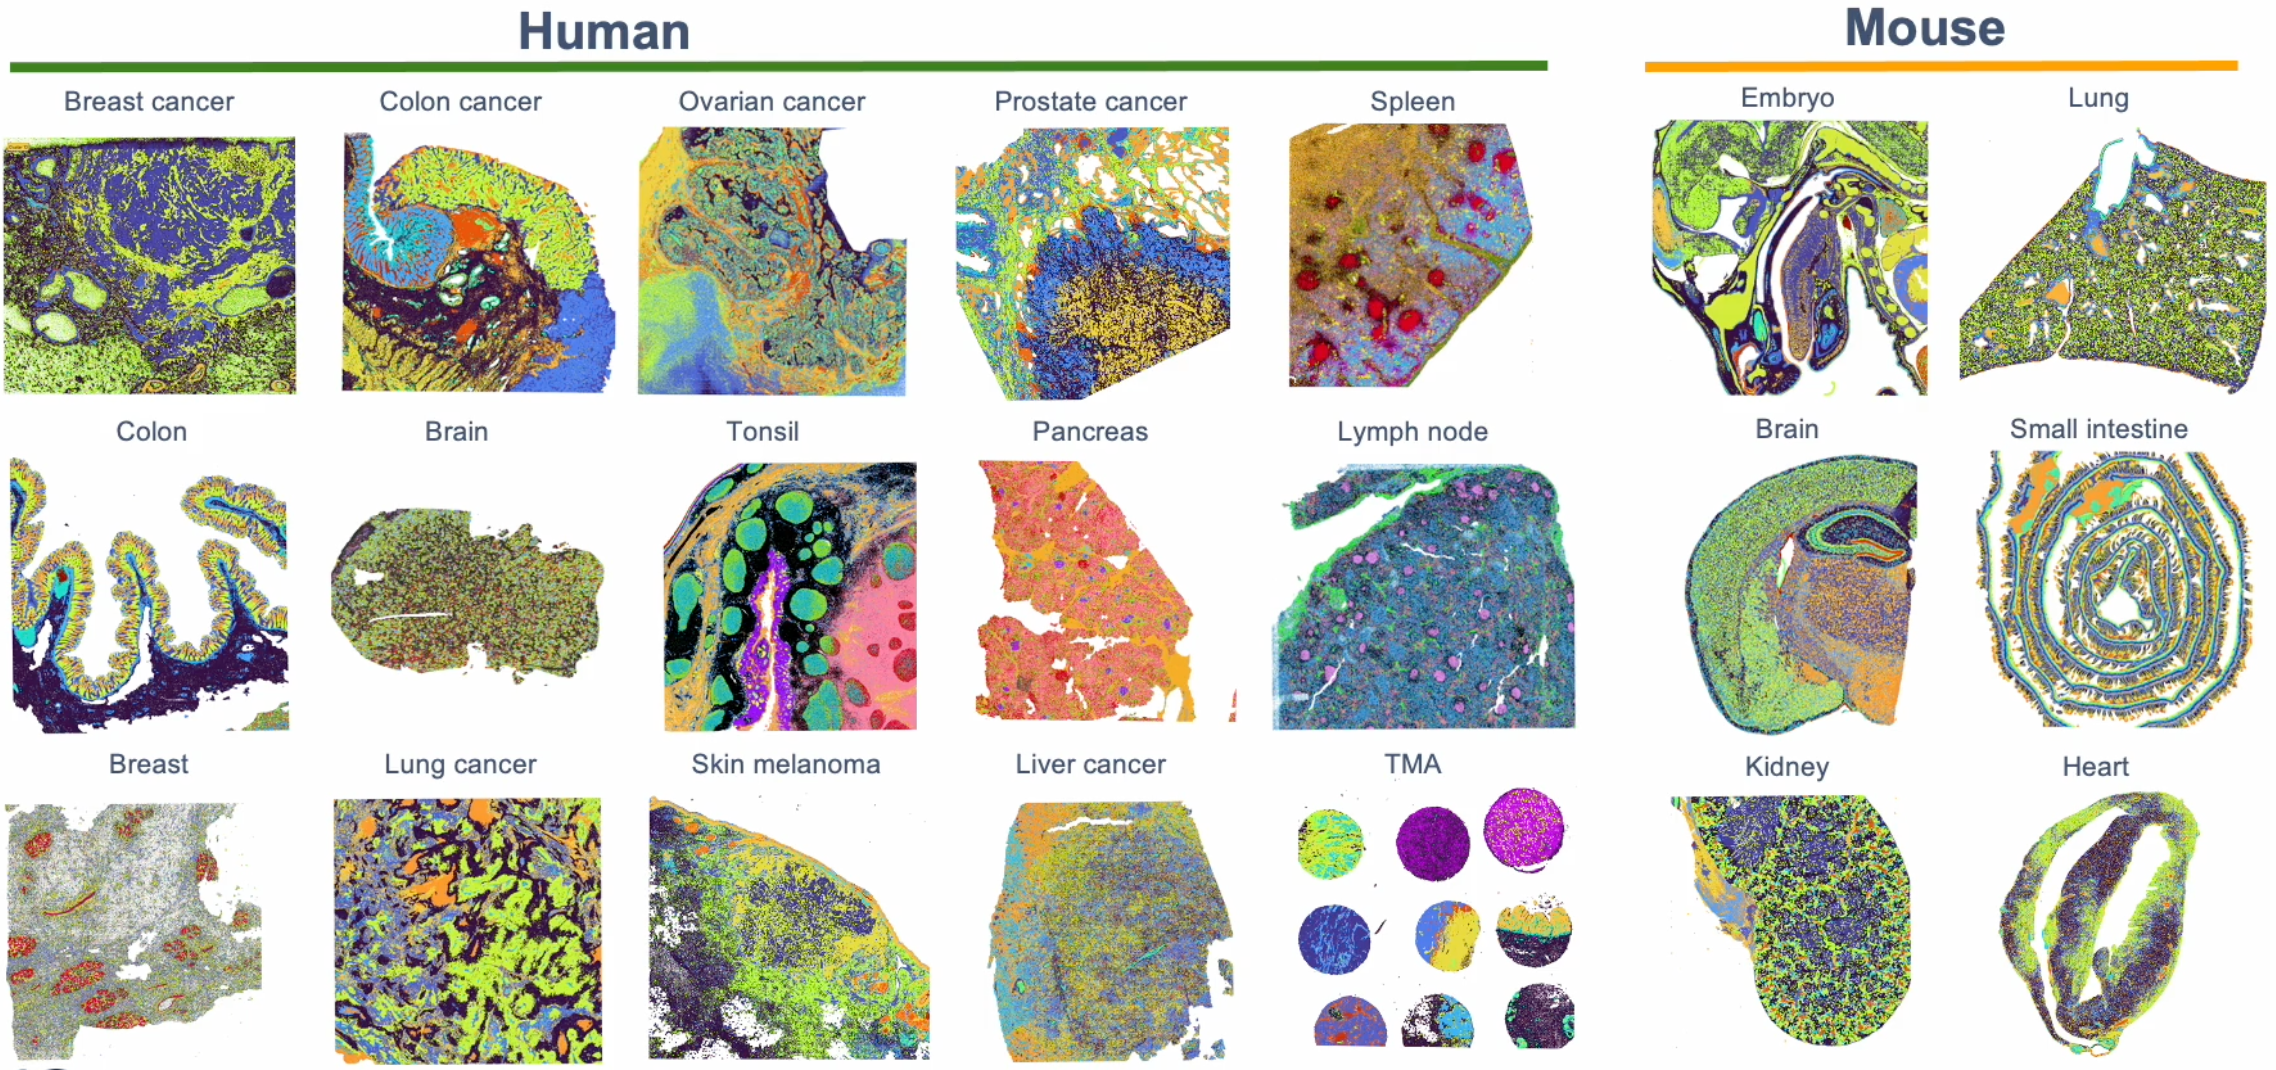 Figure 6. A collage of the human and mouse FFPE tissues that have been tested with the Visium HD assay. Of note, a number of challenging tissue samples, such as human spleen, have been tested and validated for Visium HD. Tissue microarrays (TMA) are also compatible with Visium HD.